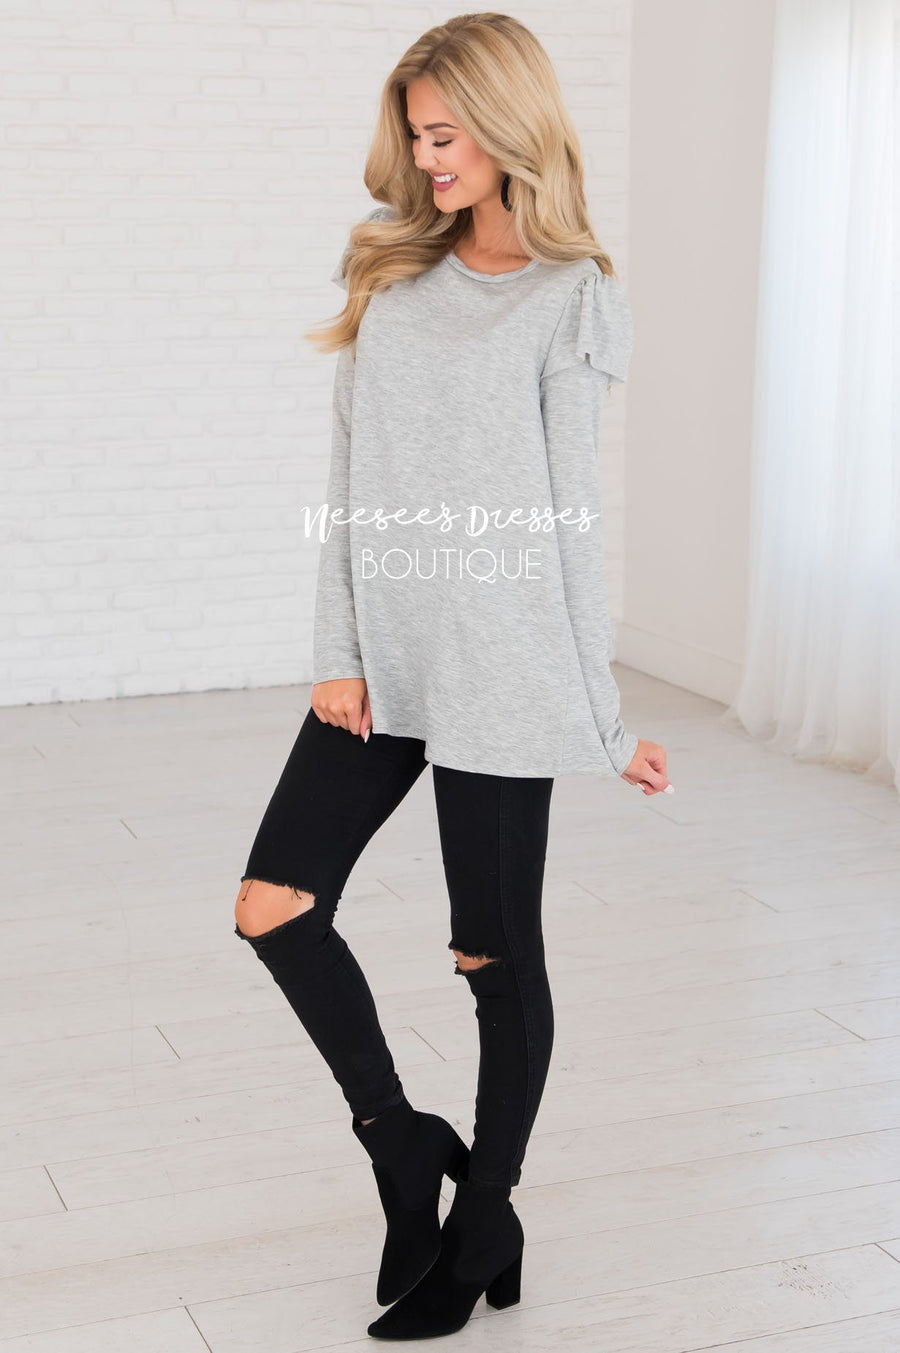 You're So Beautiful Ruffle Sleeve Top Modest Dresses vendor-unknown 